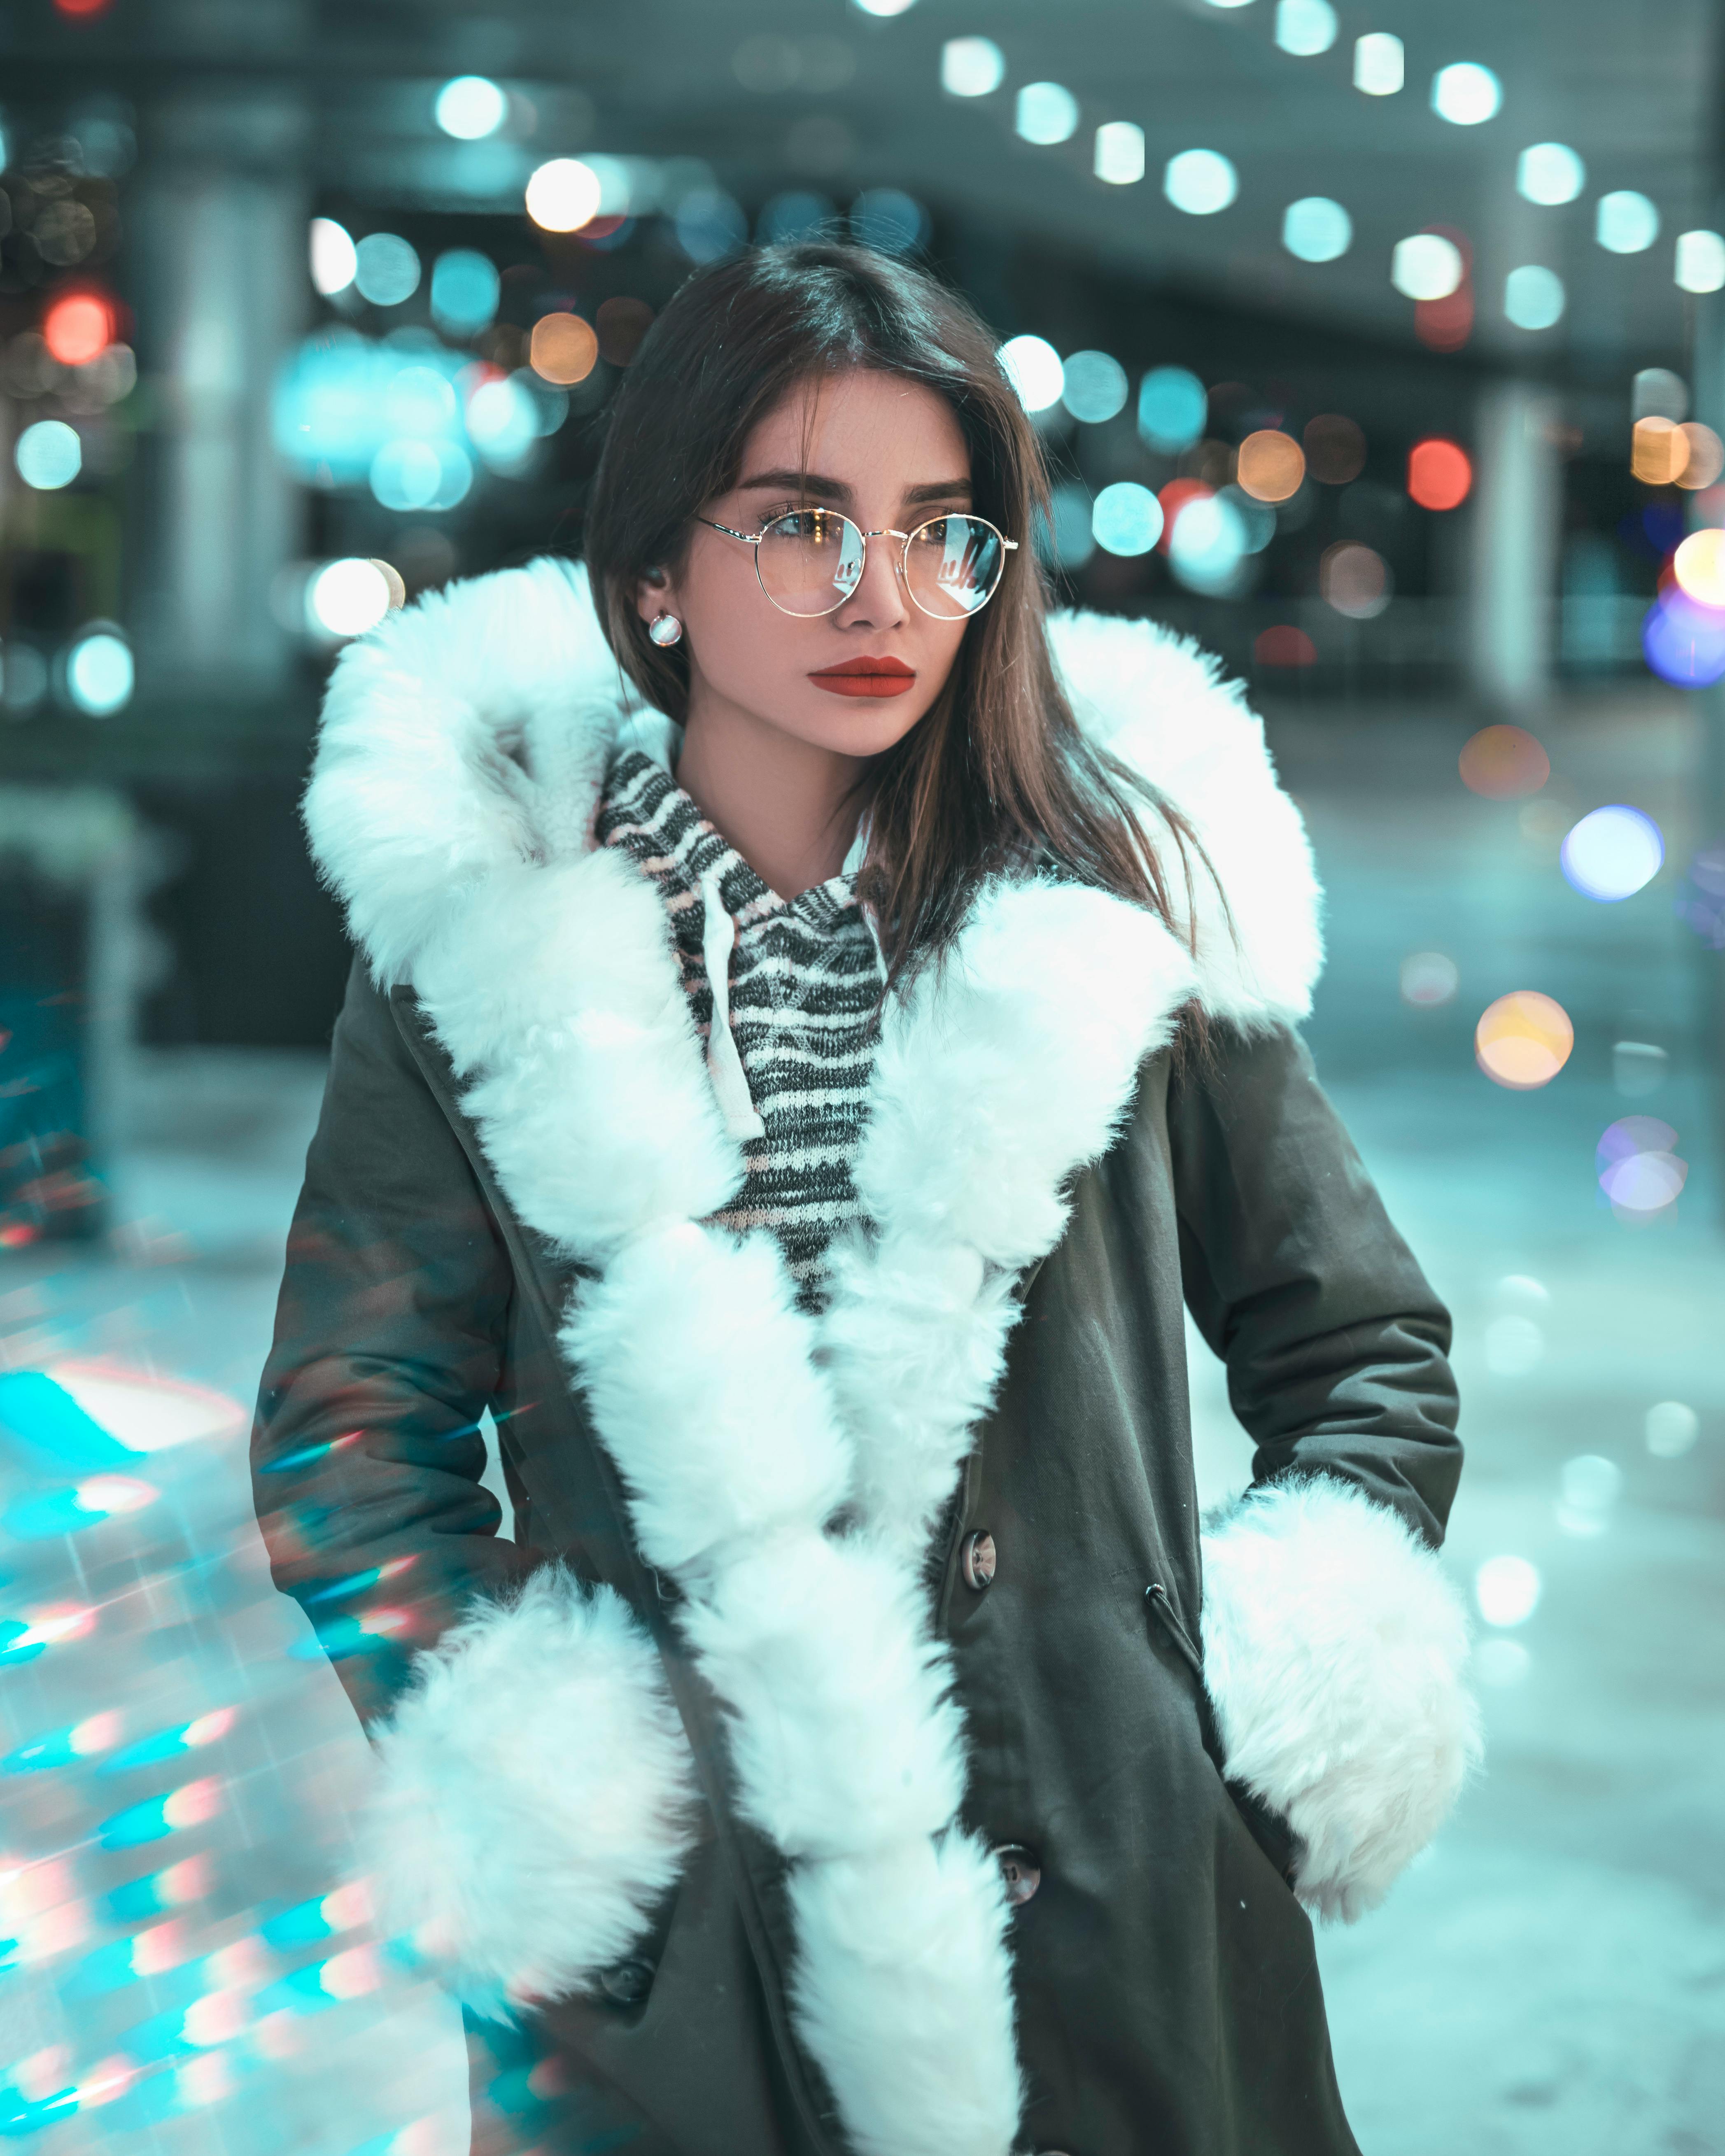 Winter Clothing Photos, Download The BEST Free Winter Clothing